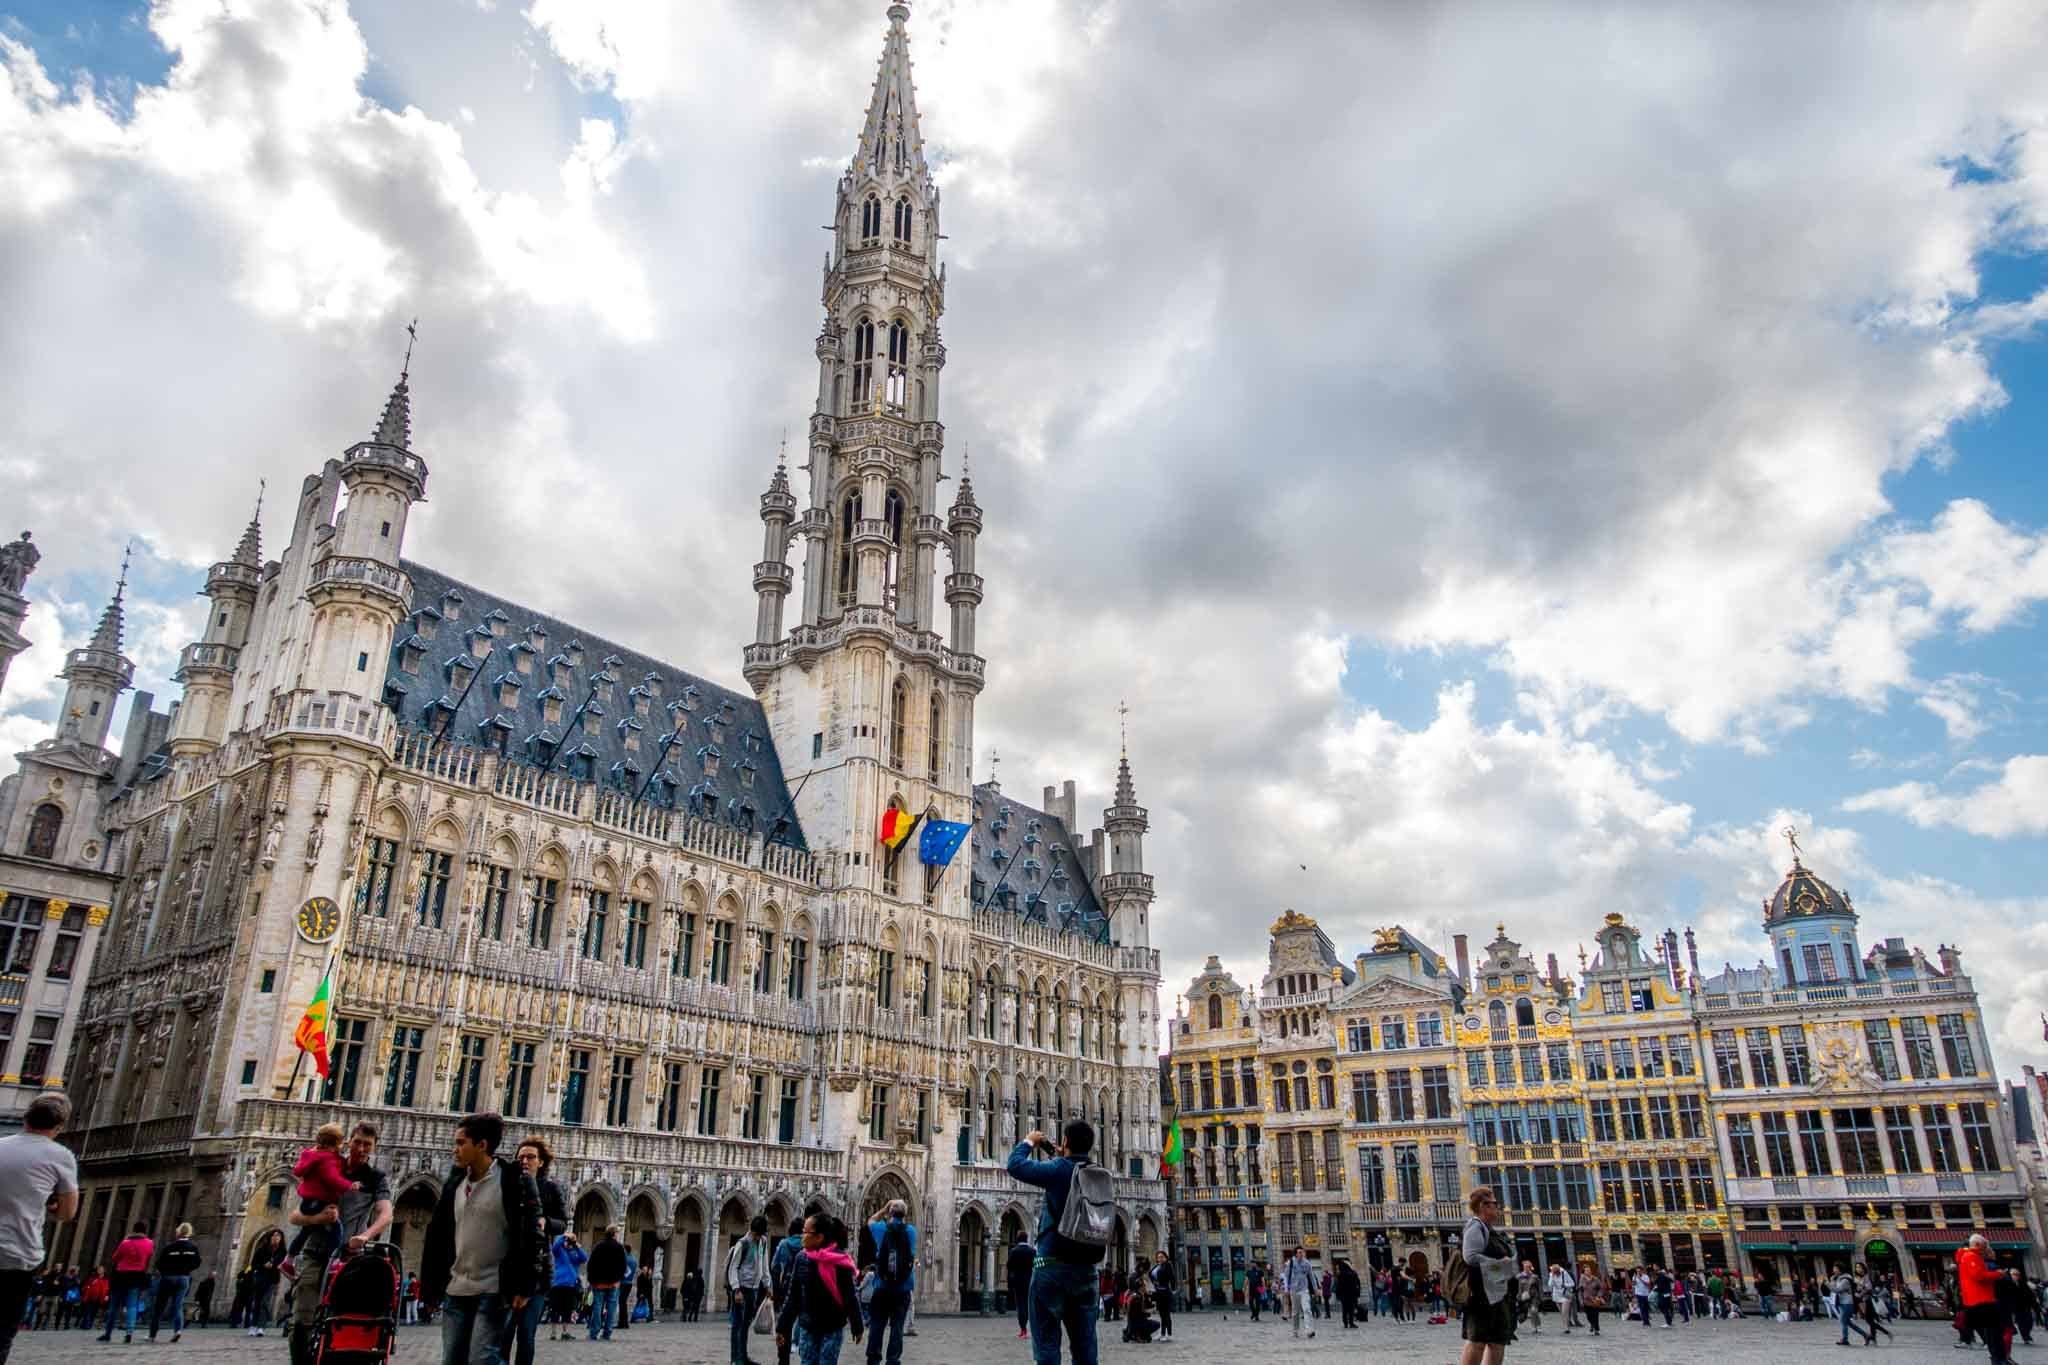 21 Fun Things to Do in Brussels in 2020 - What to Do, Eat, & See